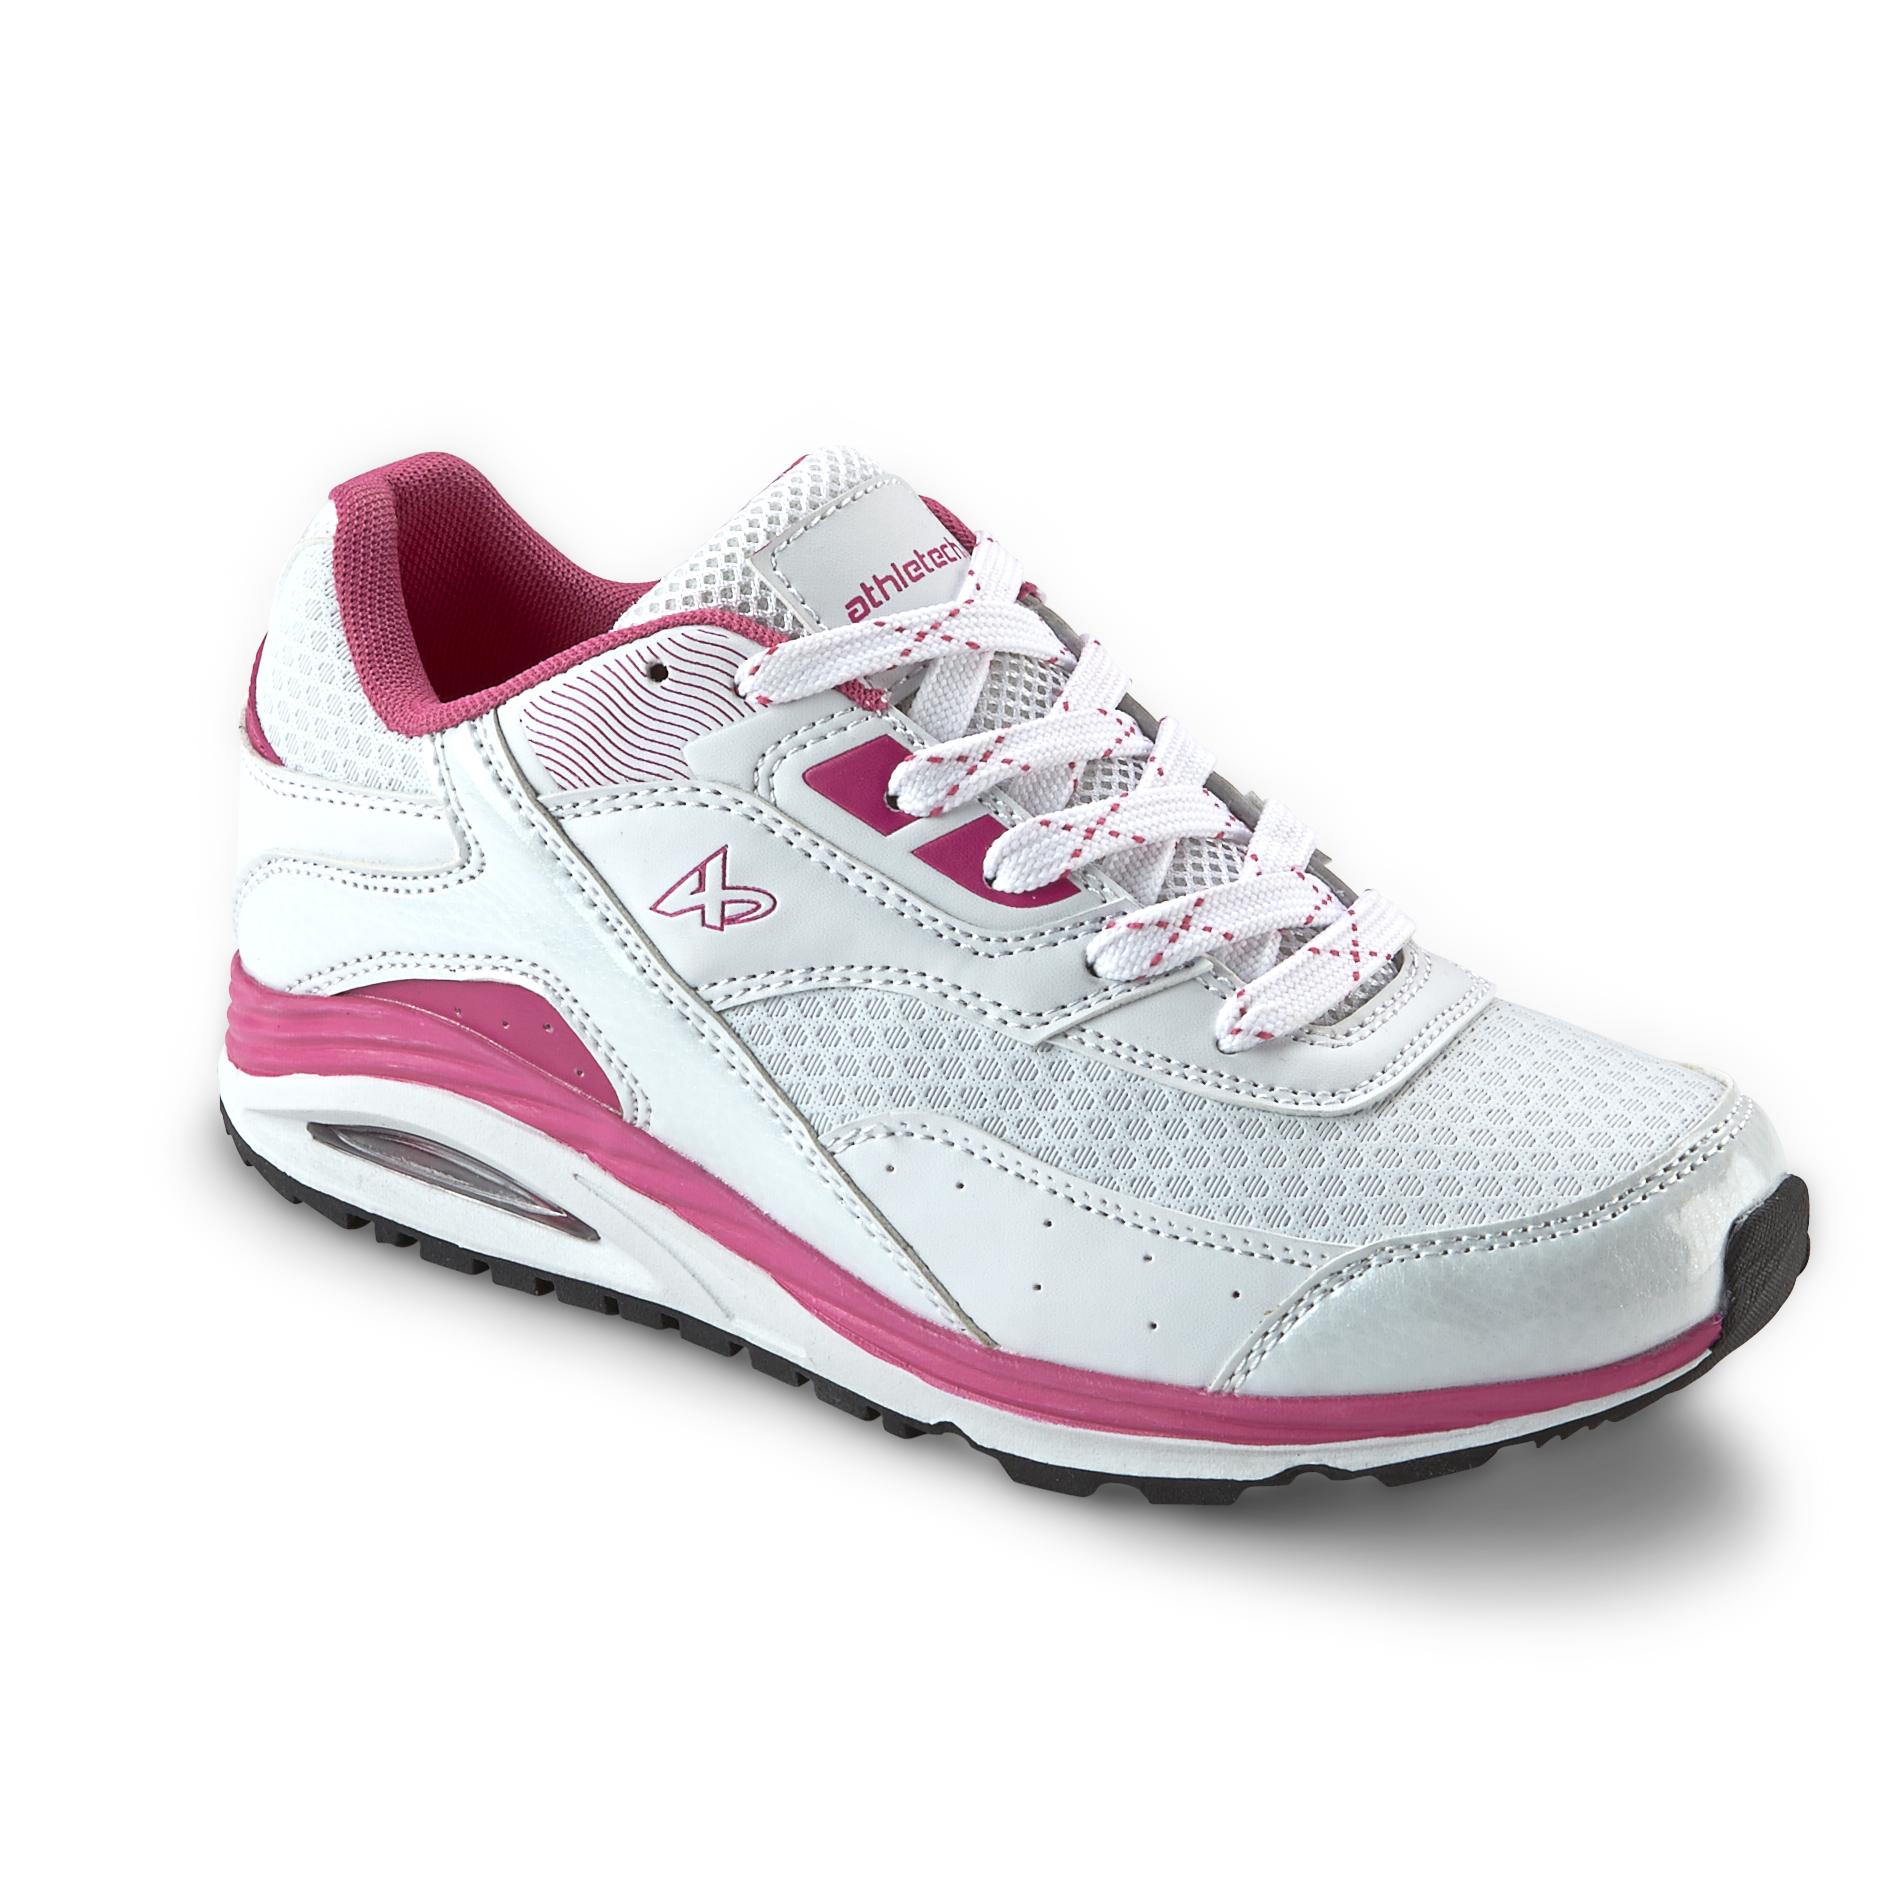 Athletech Women's Bobby White/Pink Athletic Shoe Shoes